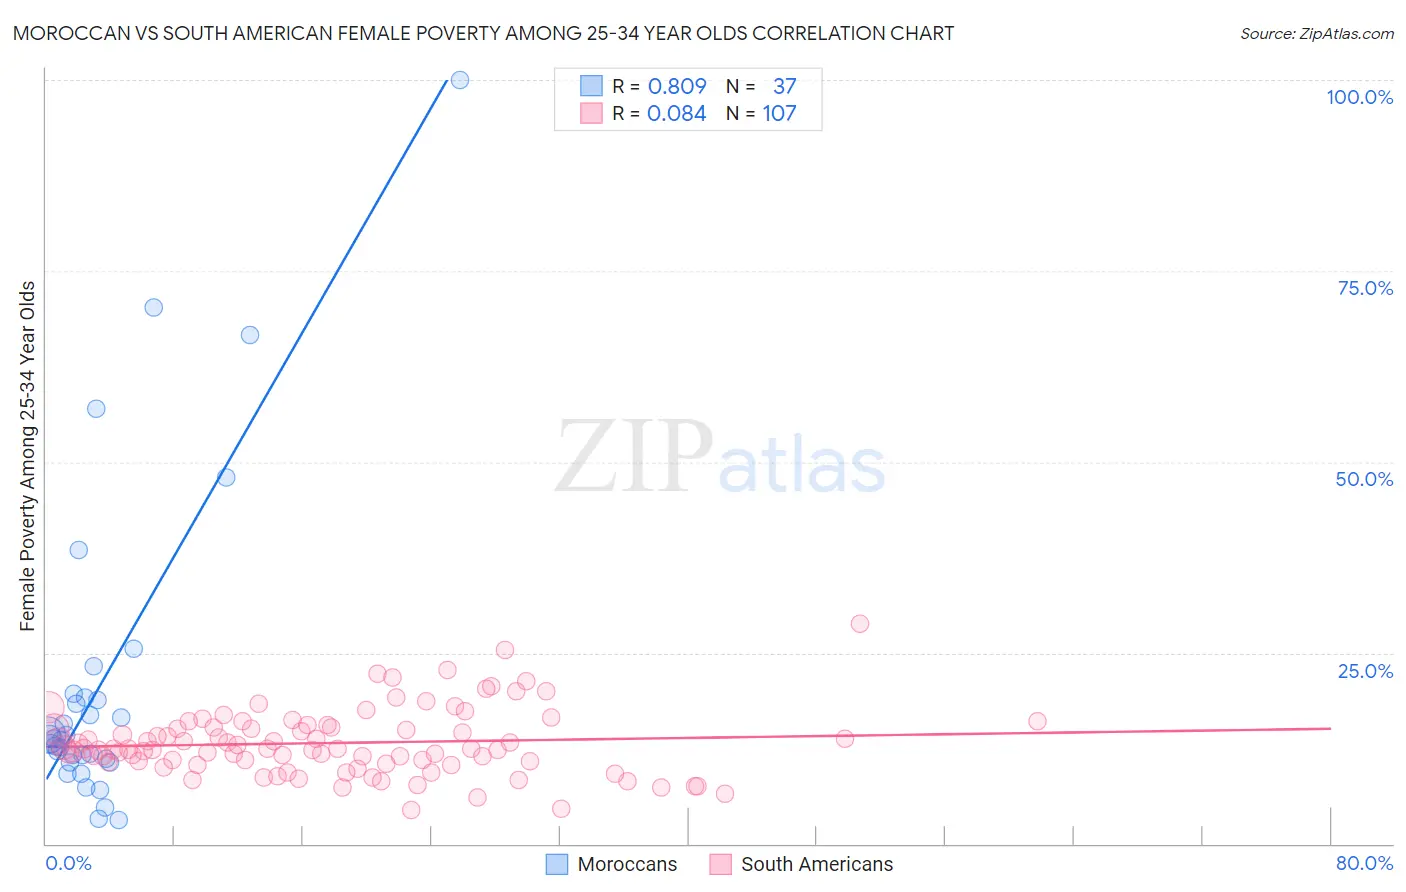 Moroccan vs South American Female Poverty Among 25-34 Year Olds